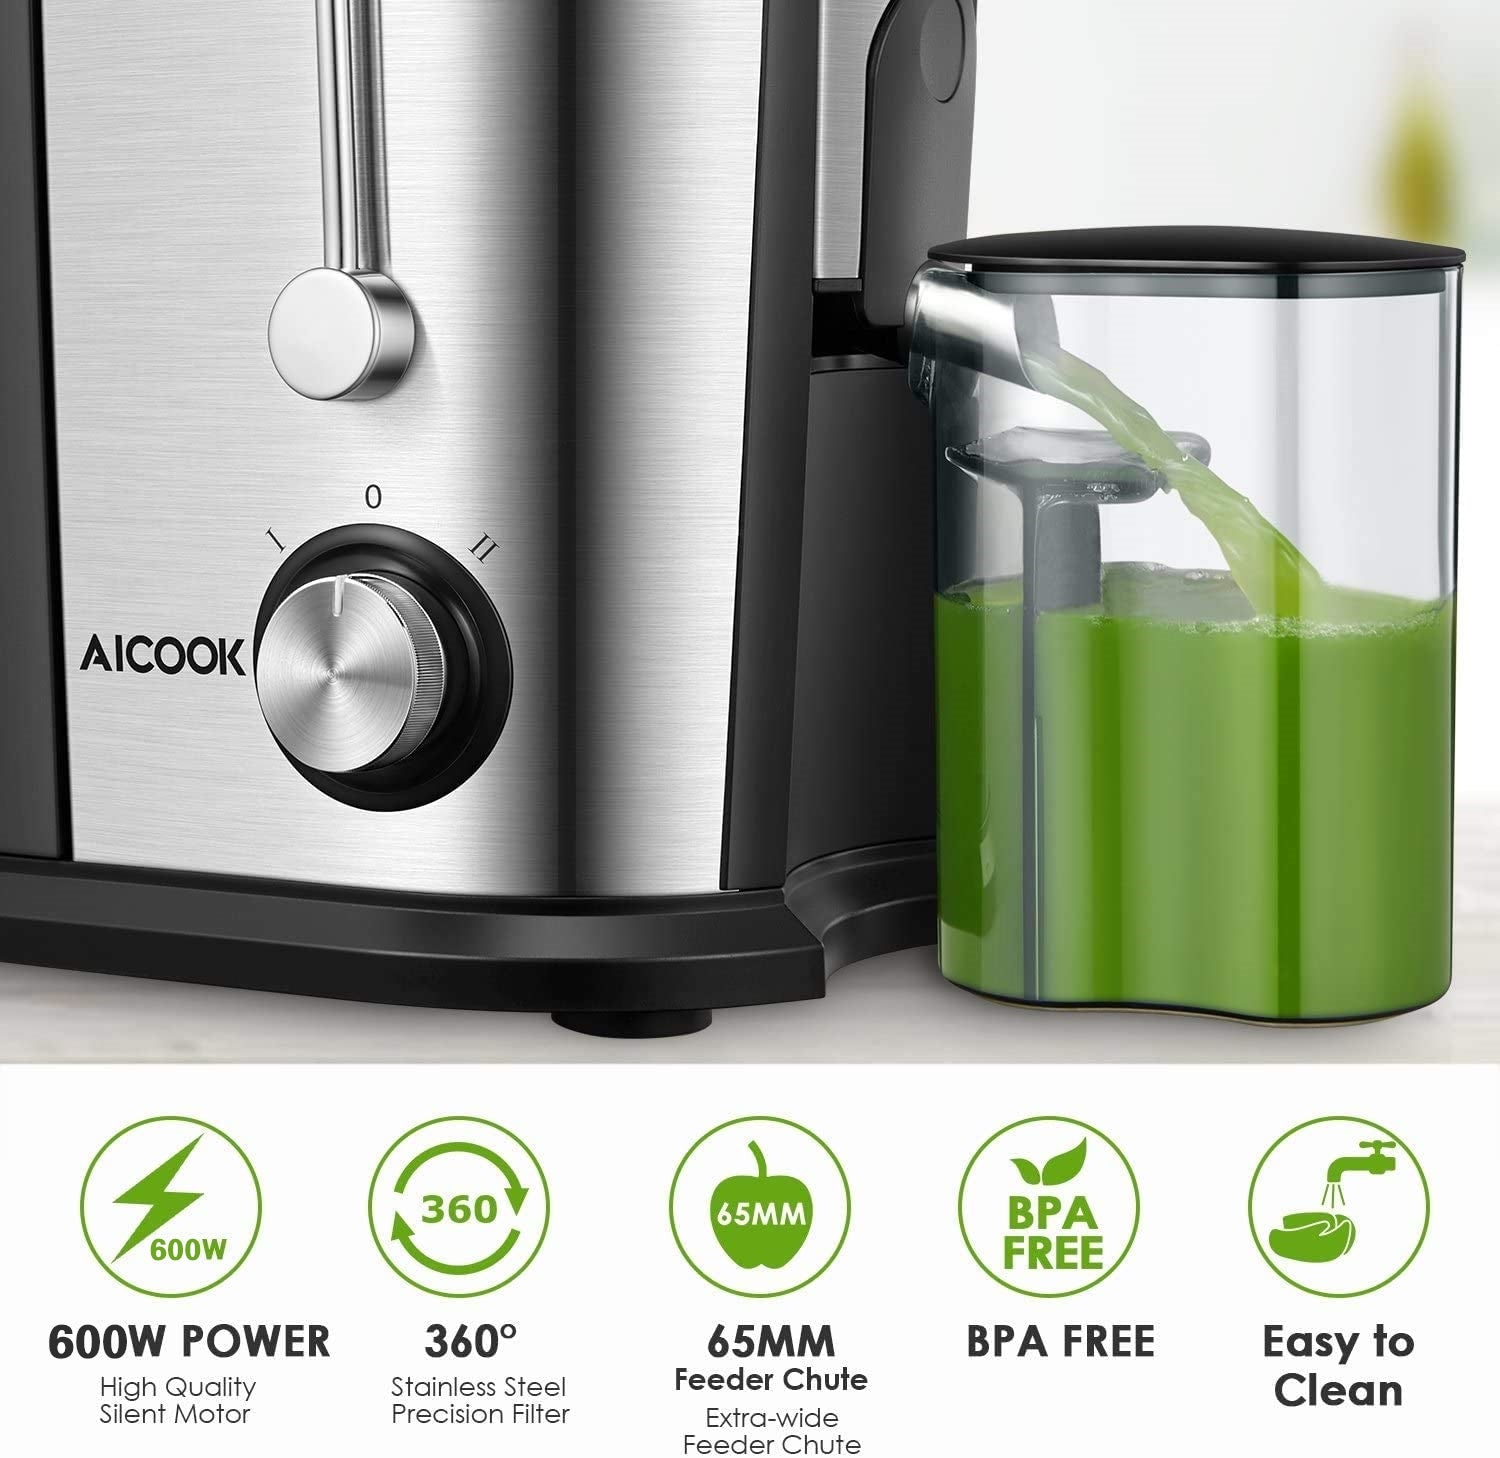 AICOOK | Juicer Wide Mouth Juice Extractor, Juicer Machines BPA Free Compact Fruits & Vegetables Juicer, Dual Speed Centrifugal Juicer with Non-drip Function, Stainless Steel Juicers Easy to Clean